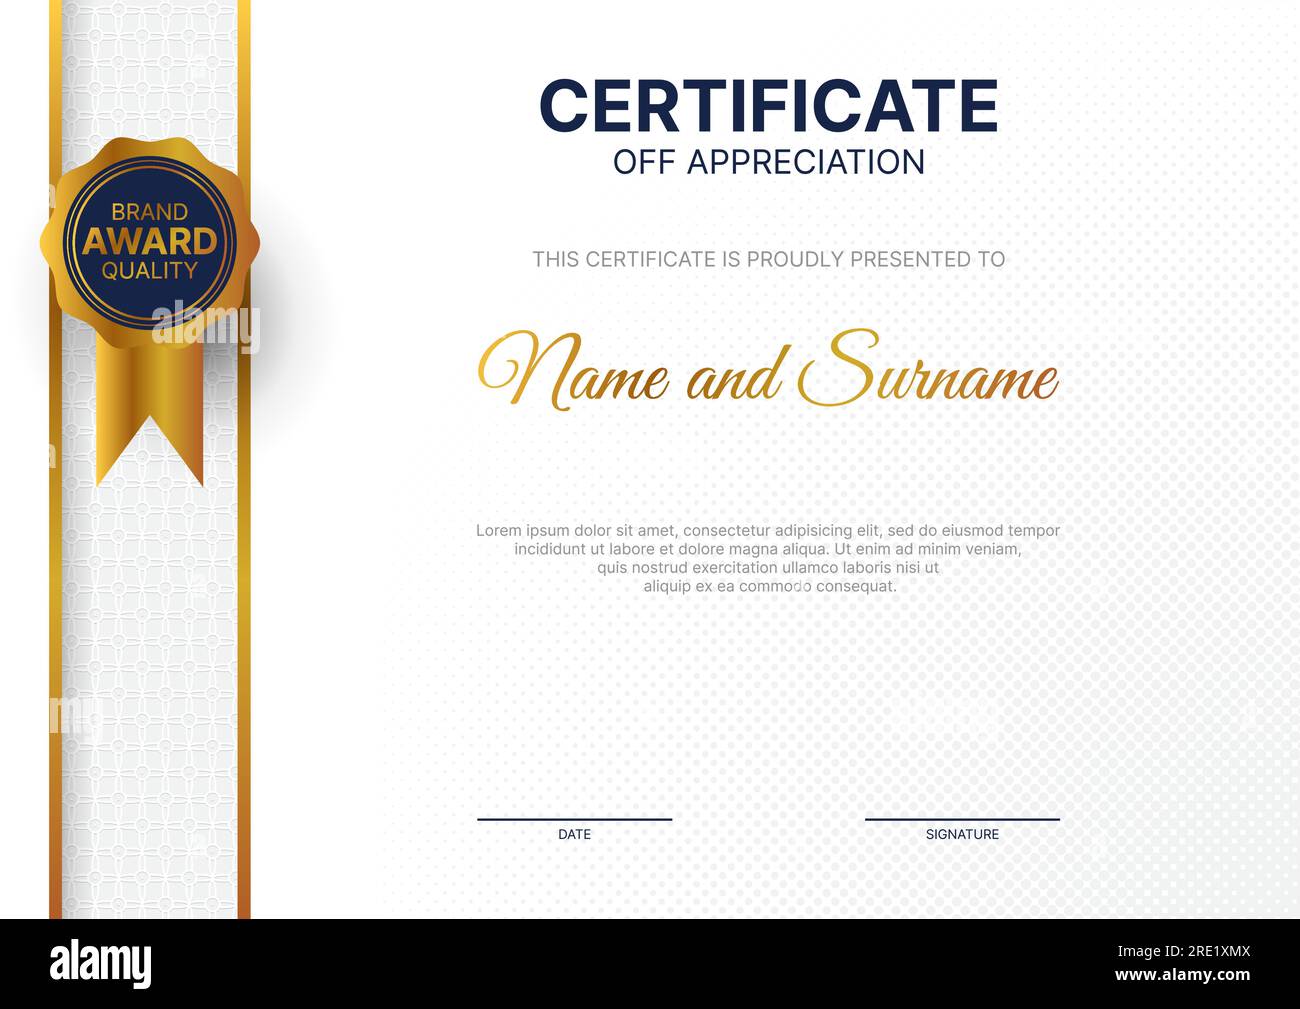 certificate of appreciation template in gold,white and dark blue color.Clean certificate design with golden badge. Stock Vector